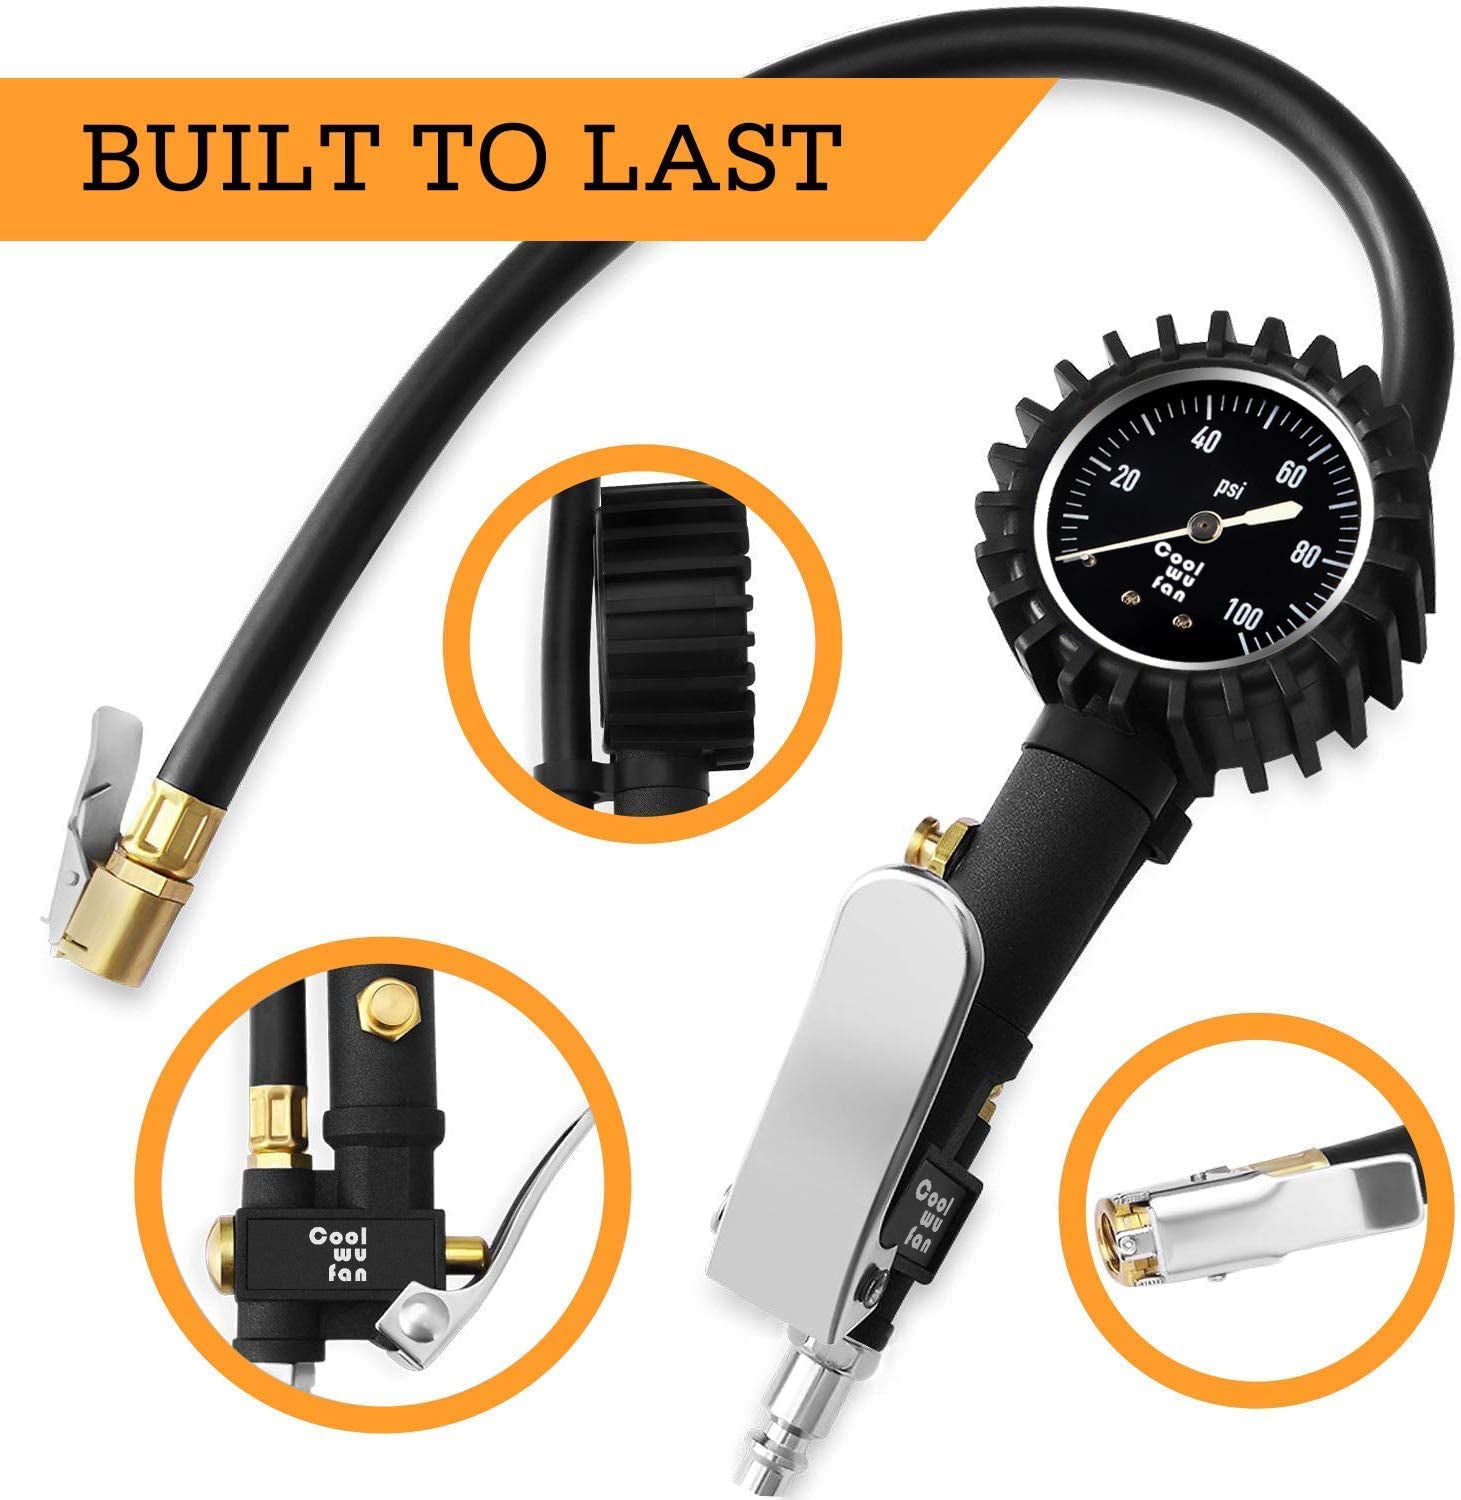 COOLWUFAN Glow Dial Tire Inflator with Pressure Gauge 100 PSI, Heavy Duty with Large 2" Easy Read Glow Dial, Air Chuck, Quick Connect Coupler and Rubber Hose Compressor Accessories, Gifts for Men